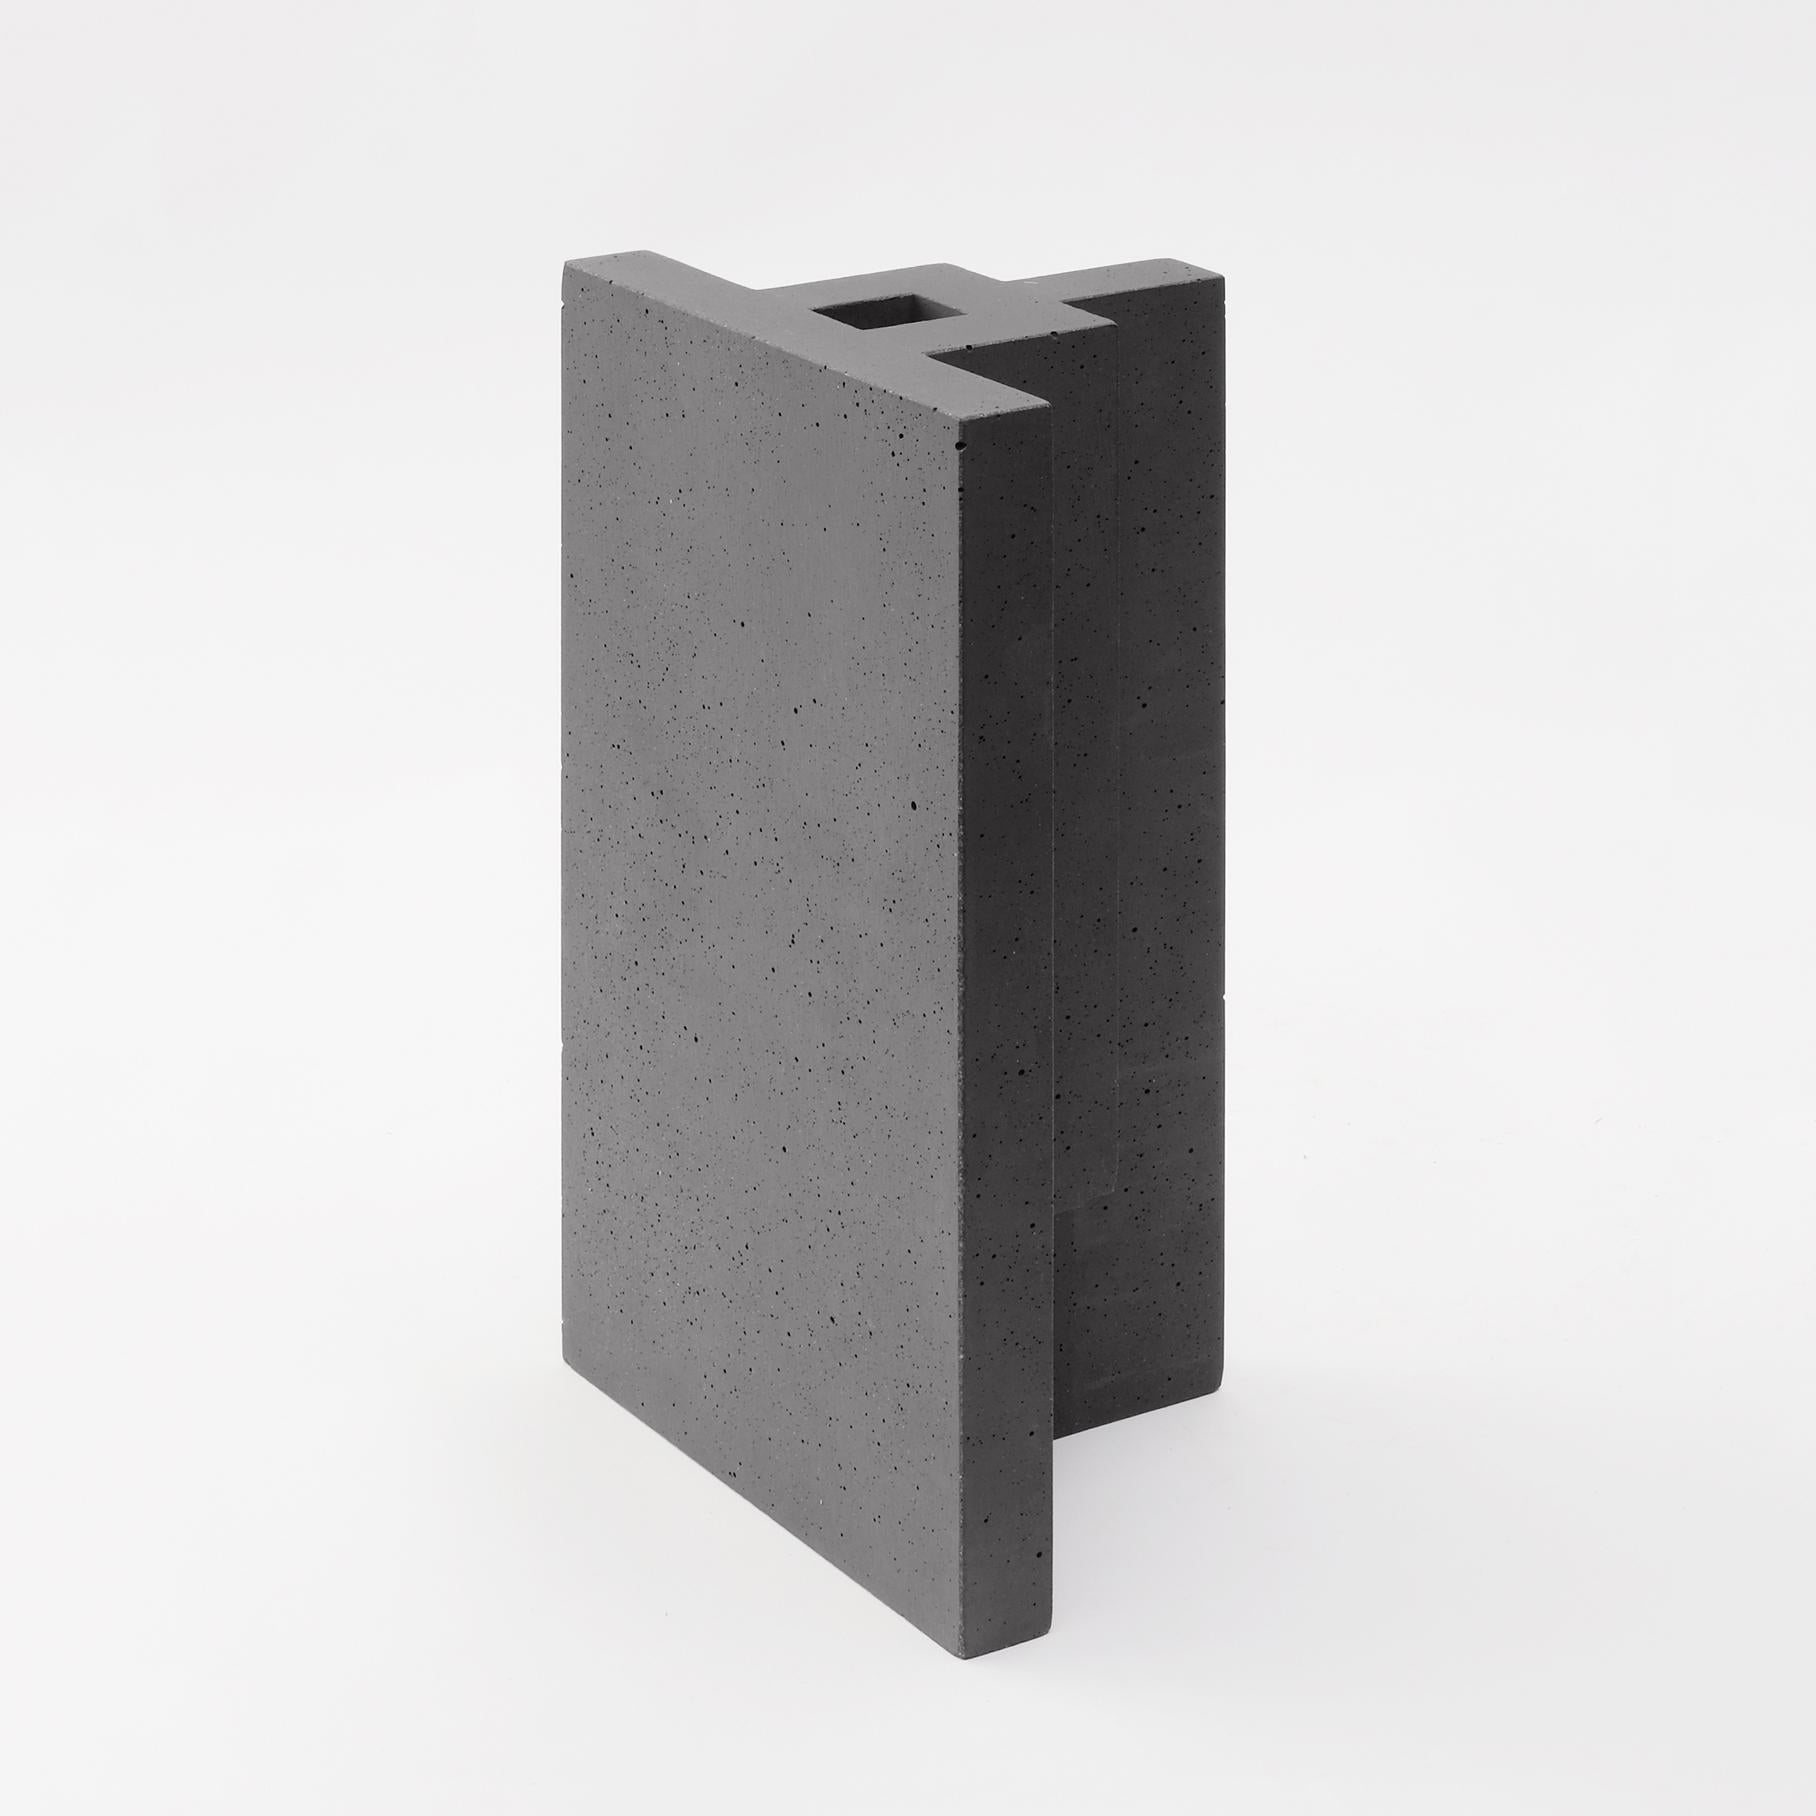 Chandigarh I - Dark Grey - Design Vase Paolo Giordano Cement Cast
Chandigarh I - Dark Grey

Chandigarh is a collection of vases inspired by the homonym city designed by Le Corbusier, who imagined and created it from nothing in India. The vases are